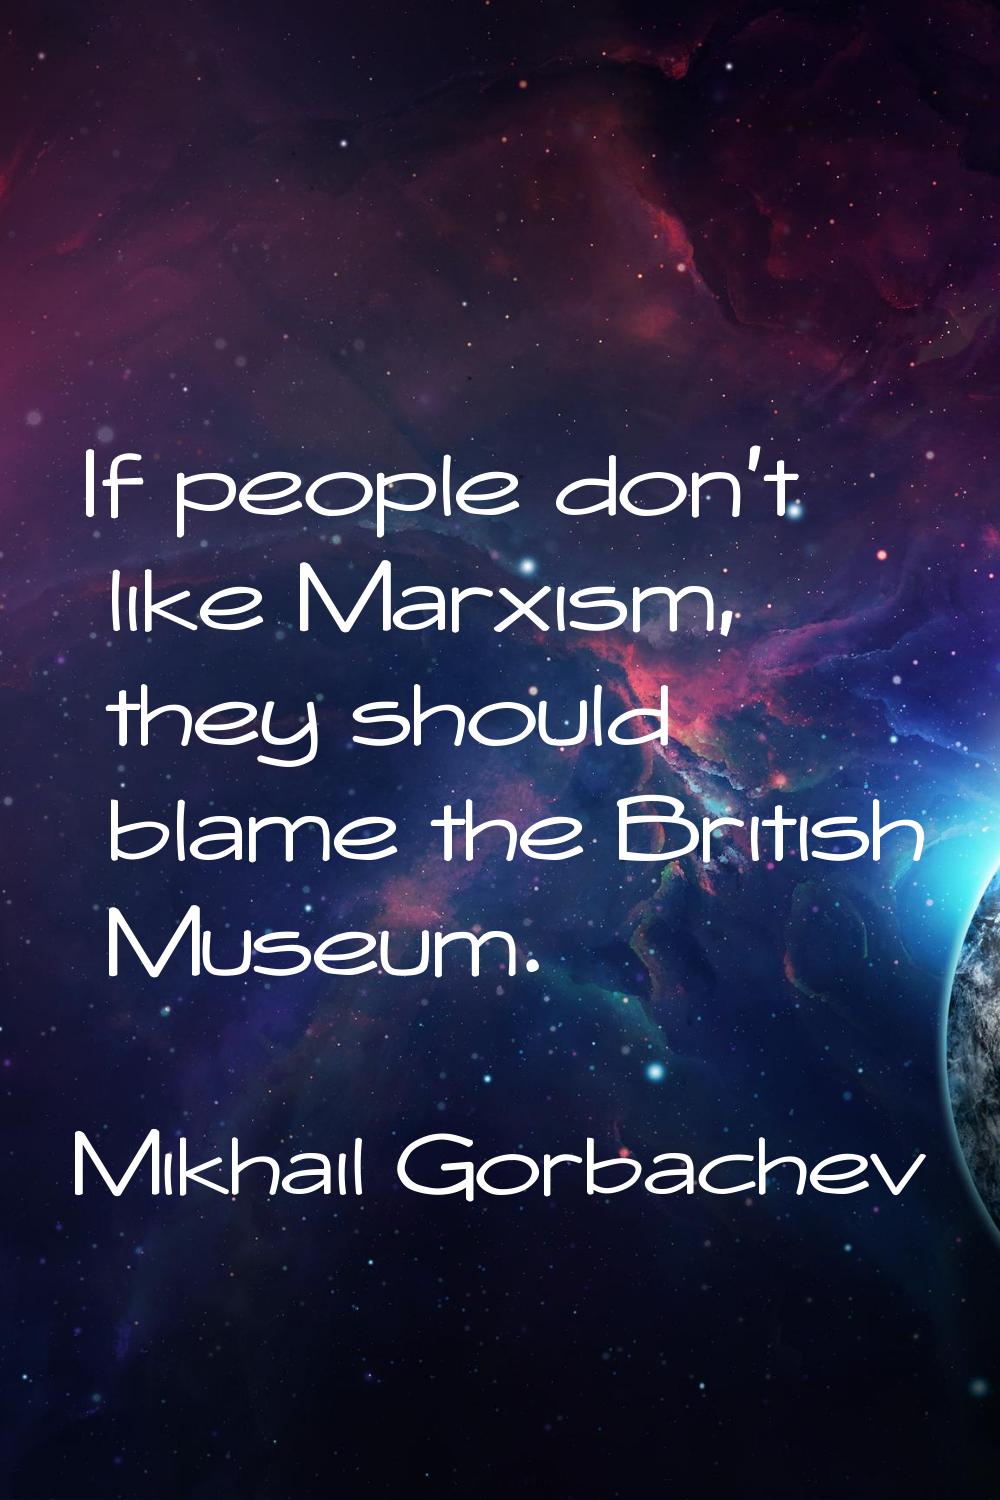 If people don't like Marxism, they should blame the British Museum.